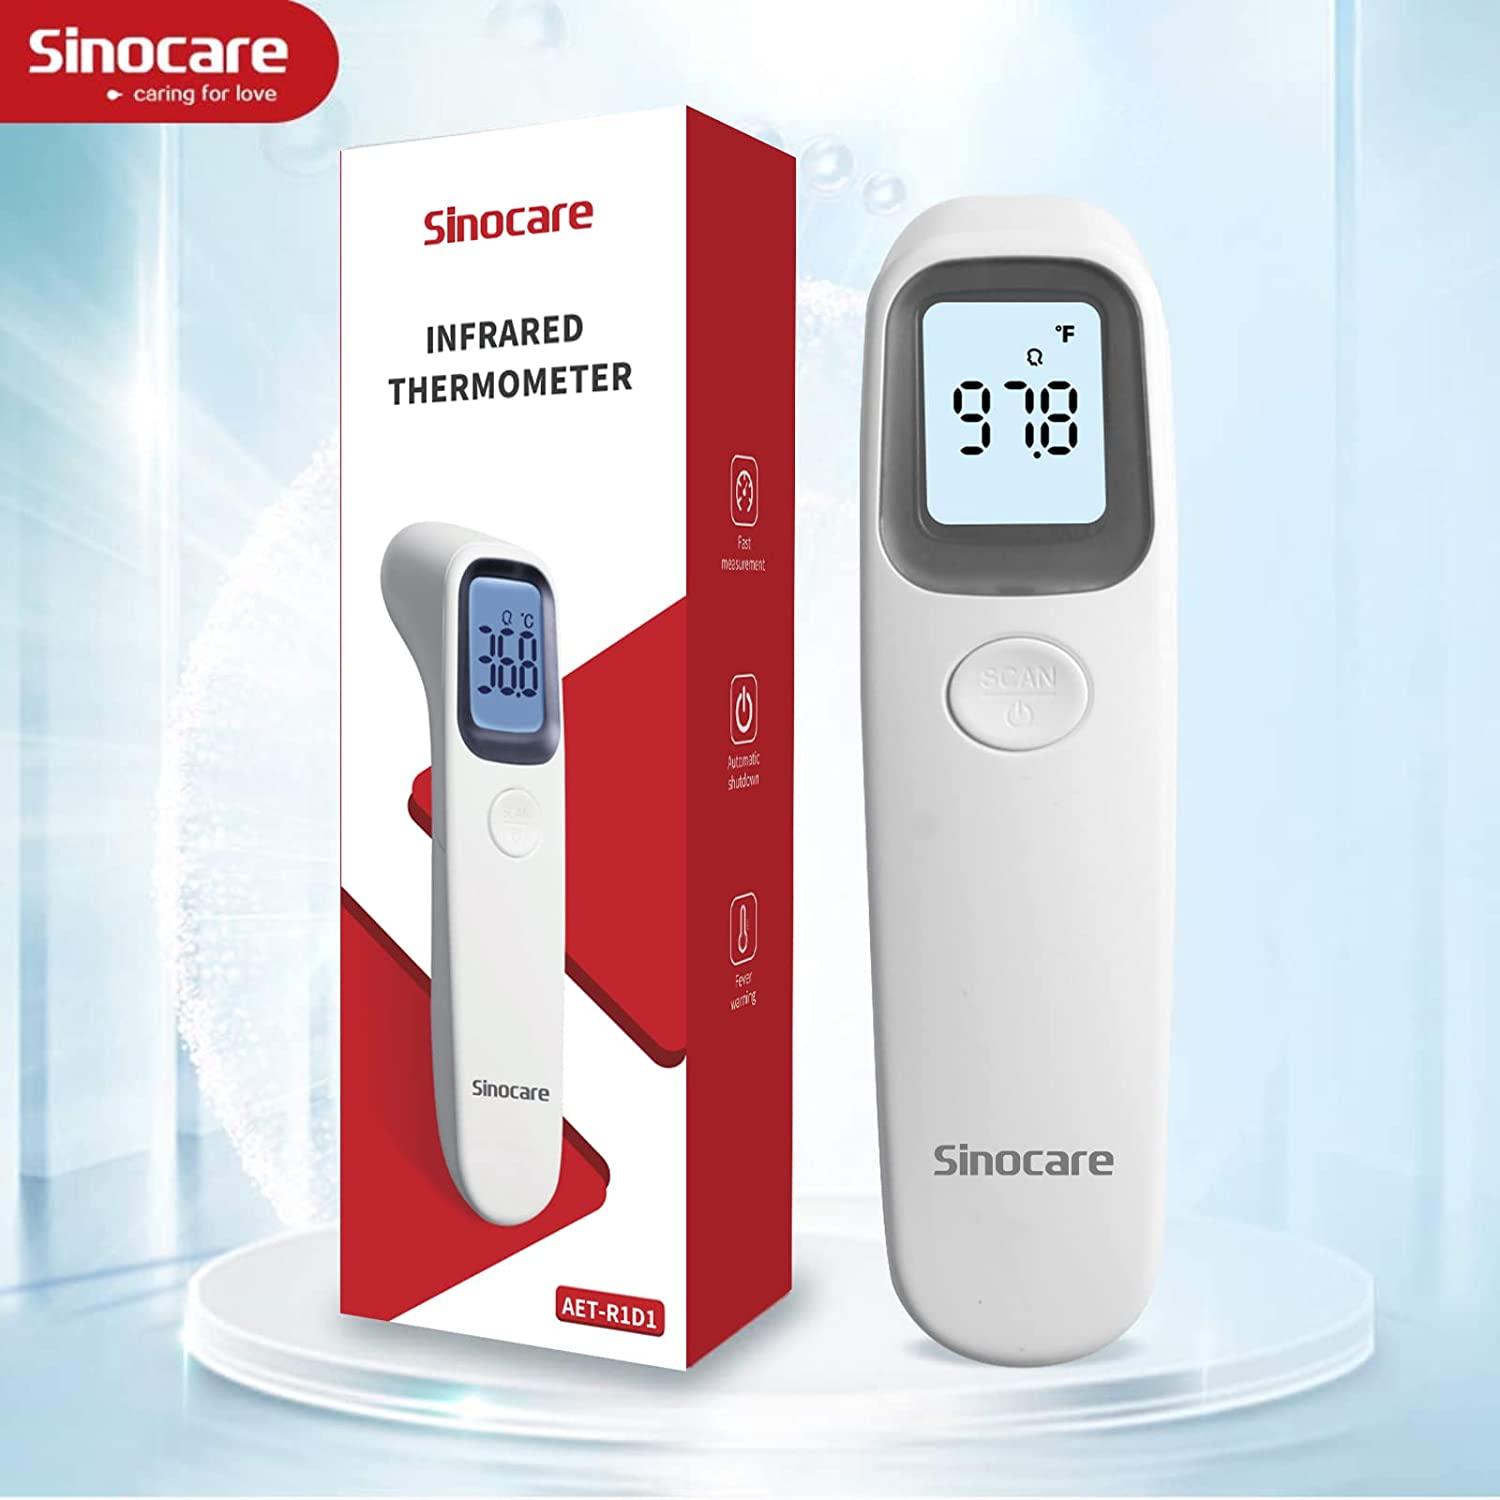 Yuwell Non-Contact Infrared Thermometers